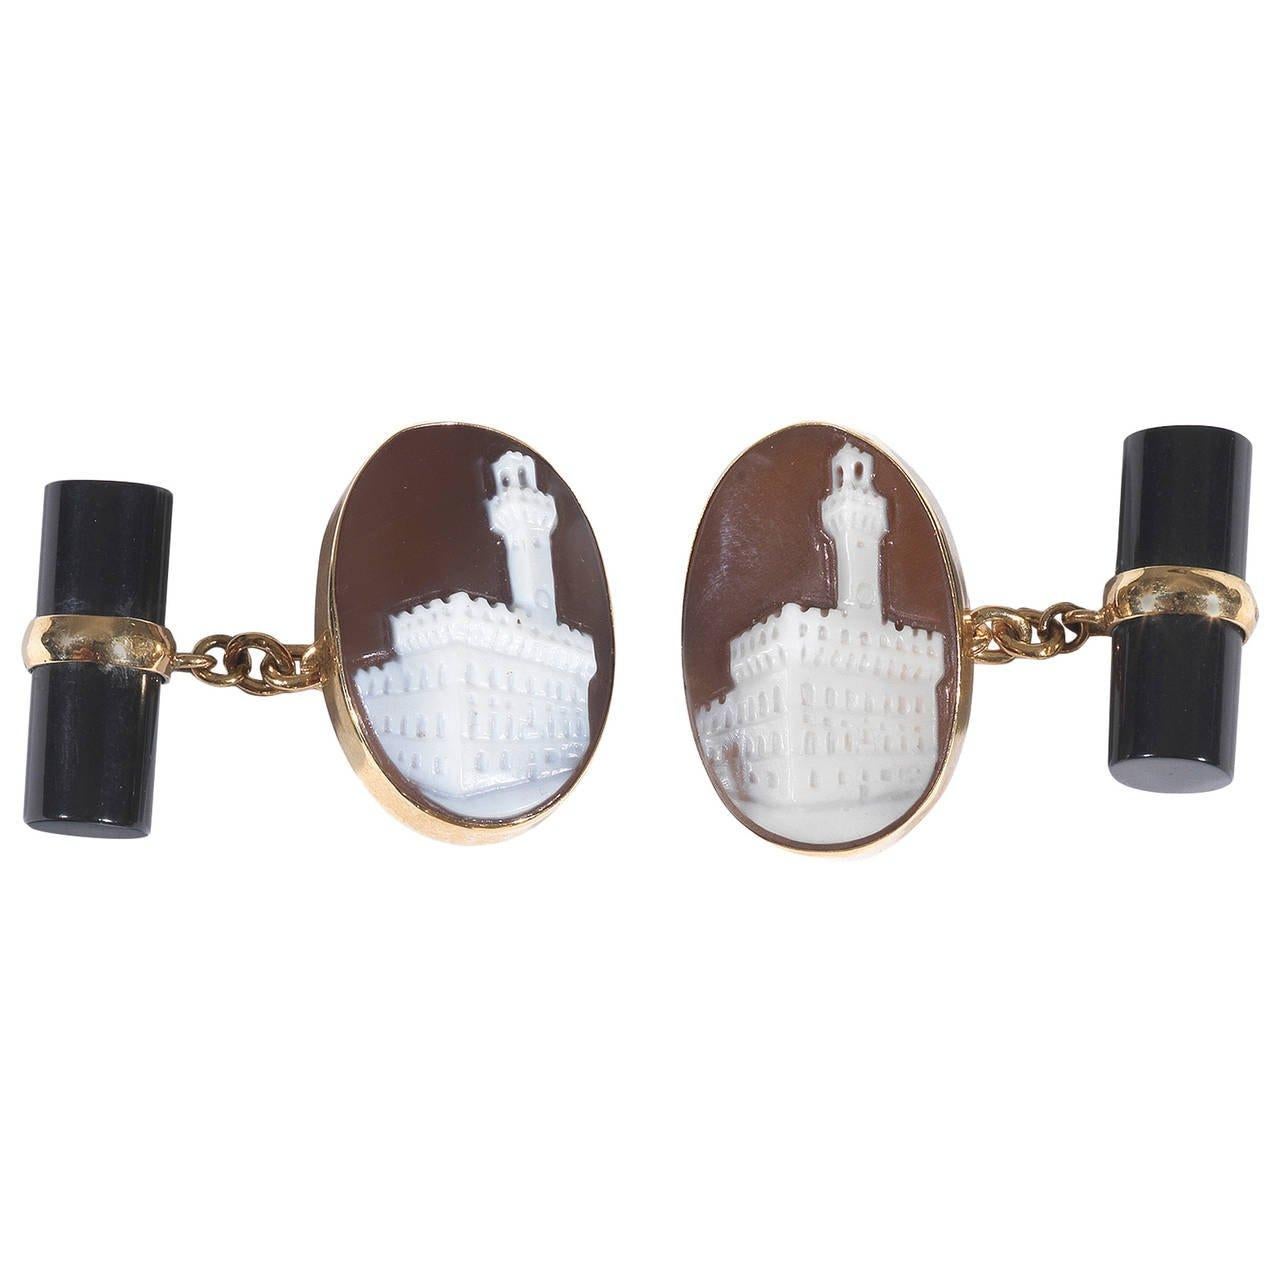 
The oval shell cameo depicting Palazzo Vecchio, the great palace in Florence.

Chain link connections with onyx baton.   

Mounted in 18Kt yellow gold